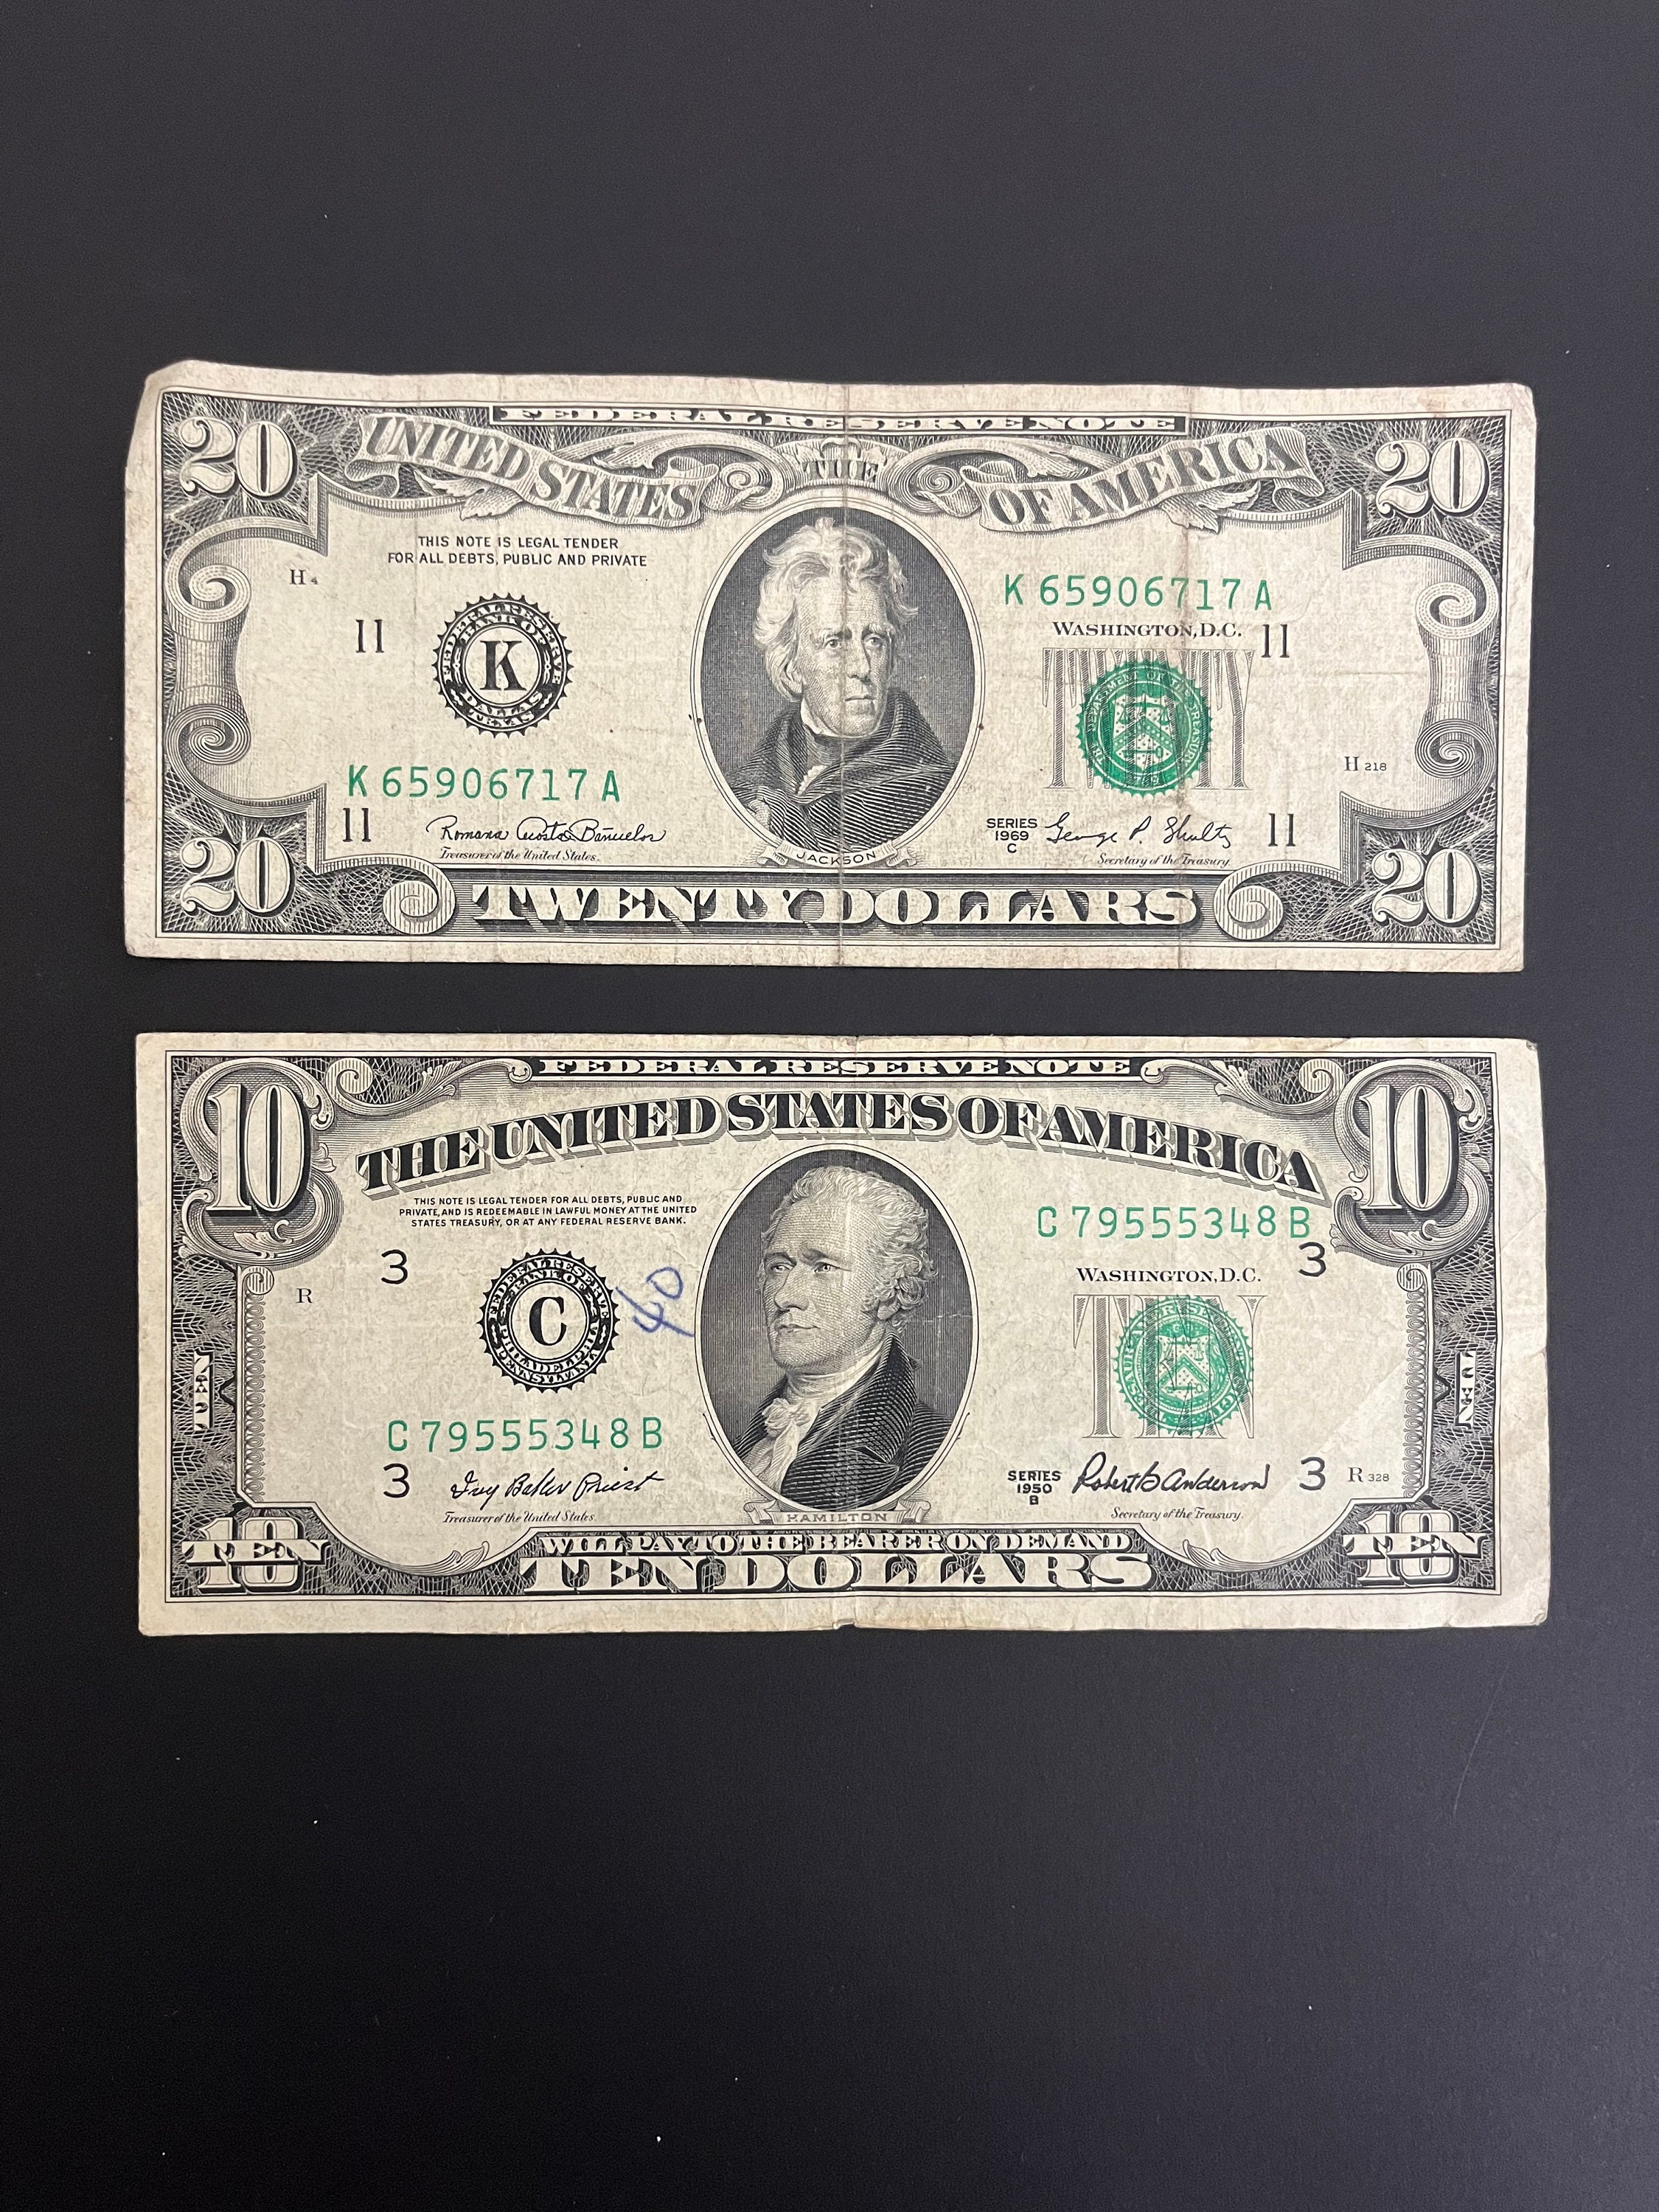 2 US Twenty Dollar Bills With Identical Matching Low 4 Digit Serial Numbers FREE  SHIPPING Uncirculated 2004 2001 